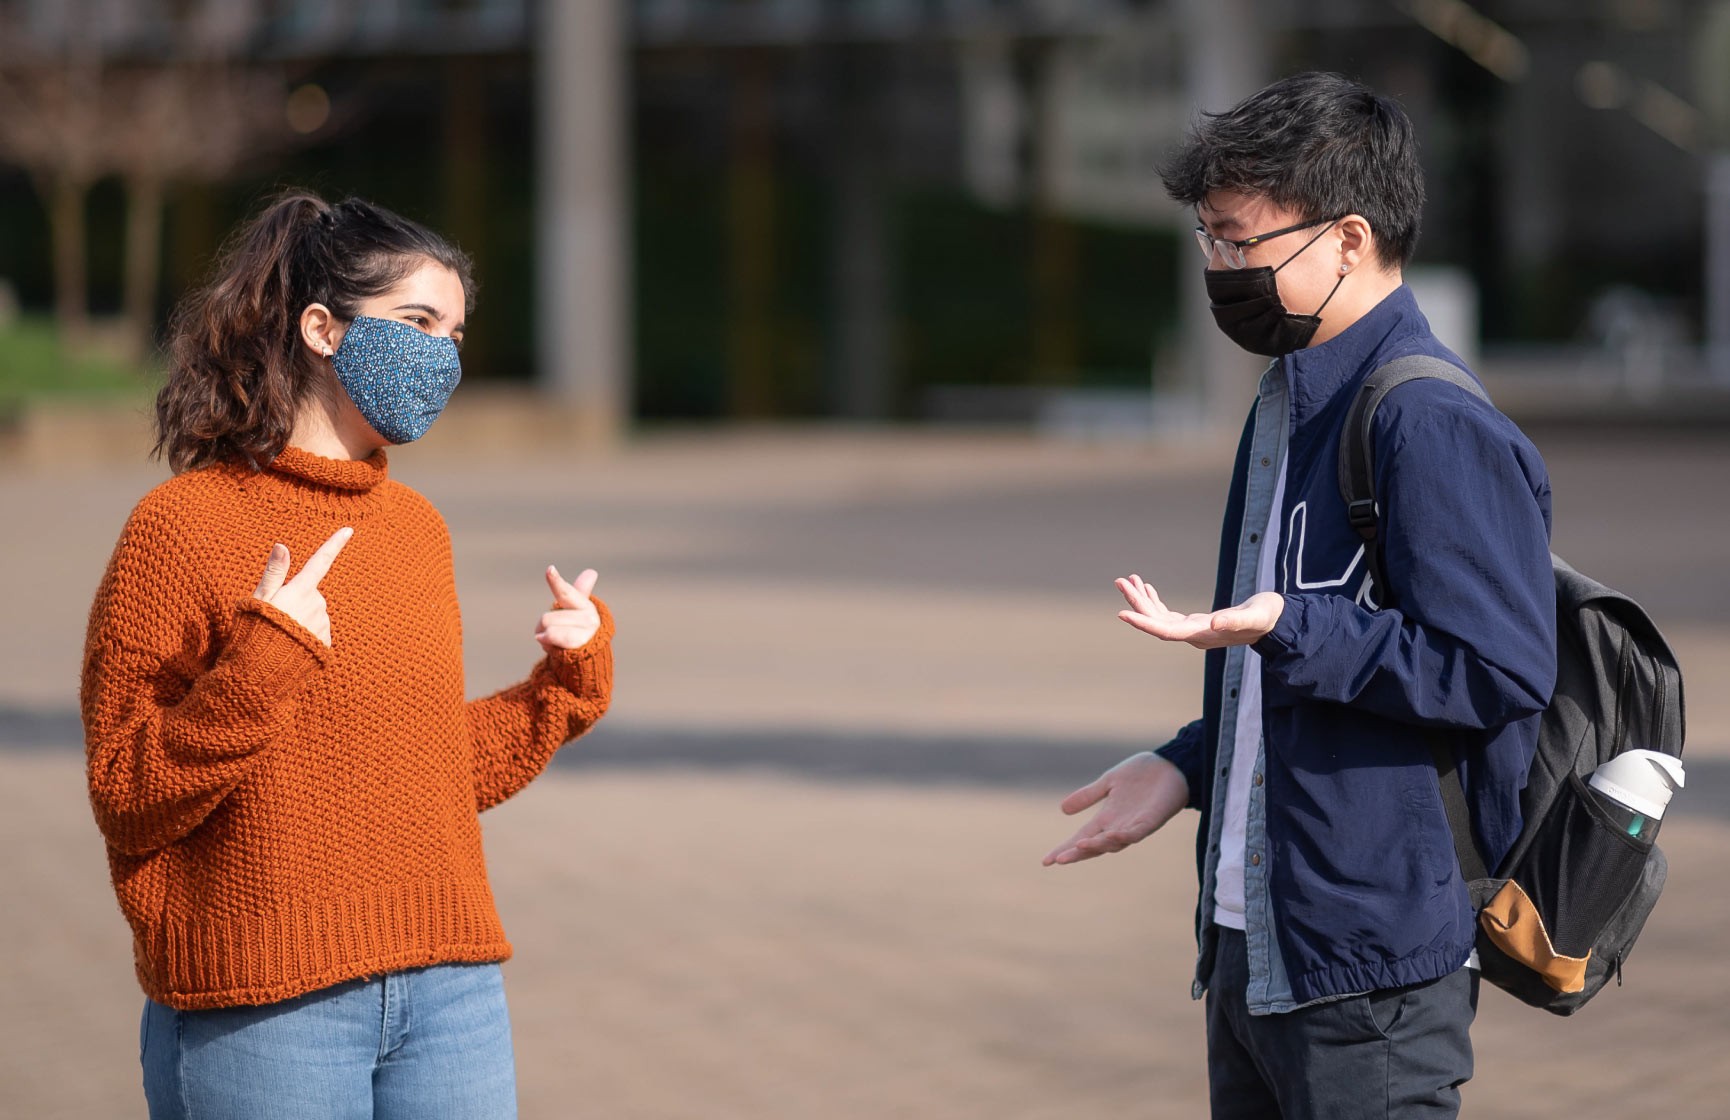 Two people wearing COVID-19 face masks use hand gestures to help communicate to each other